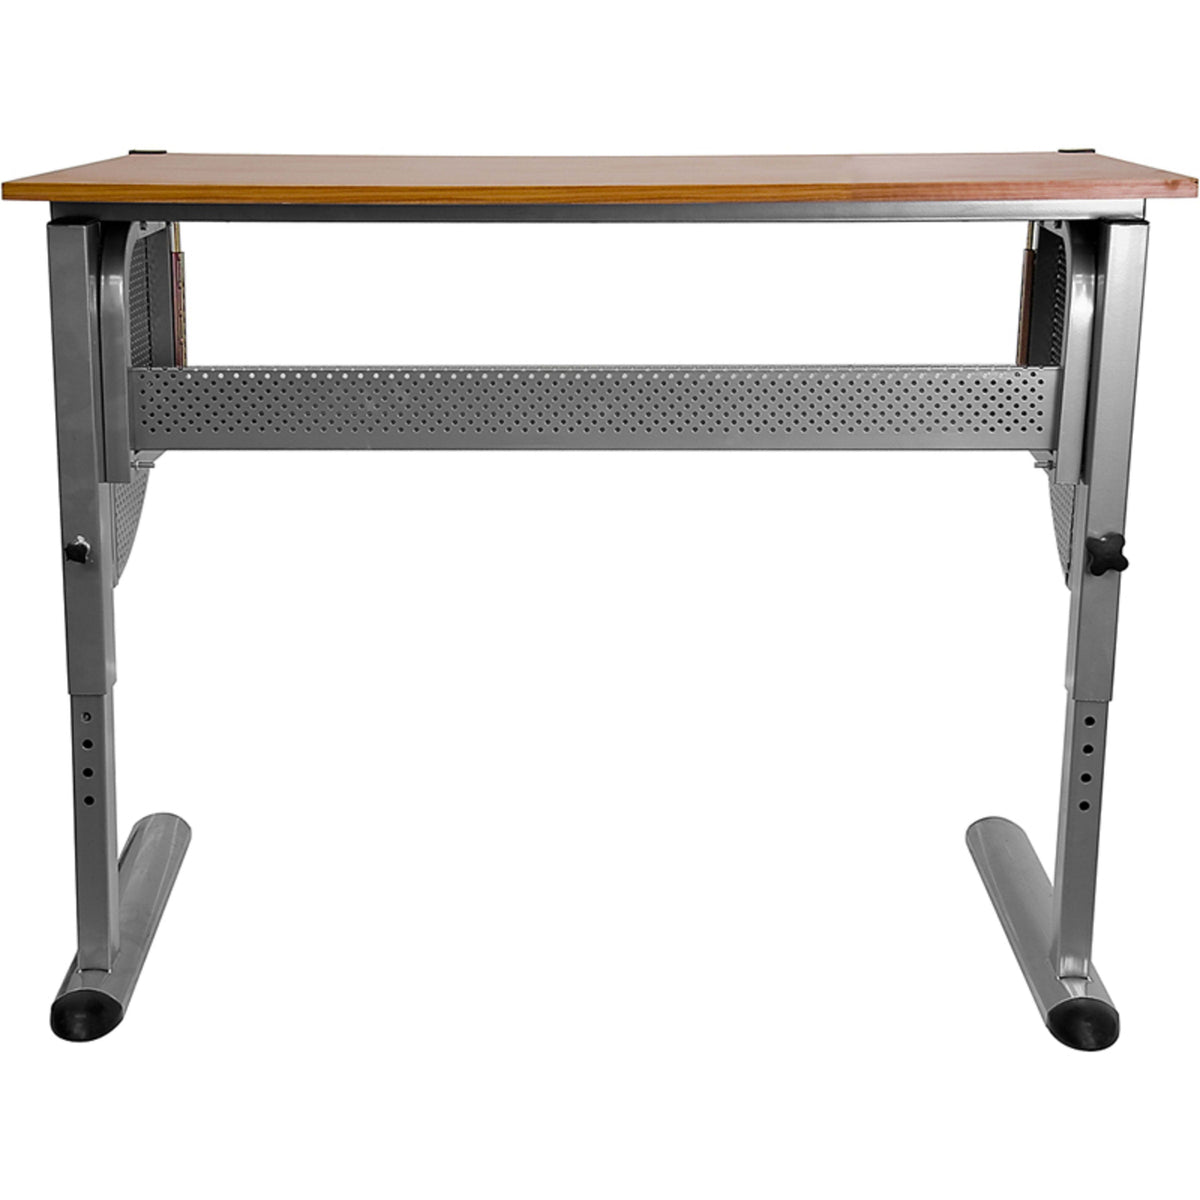 Adjustable Drawing and Drafting Table with Pewter Frame and Lower Supply Tray